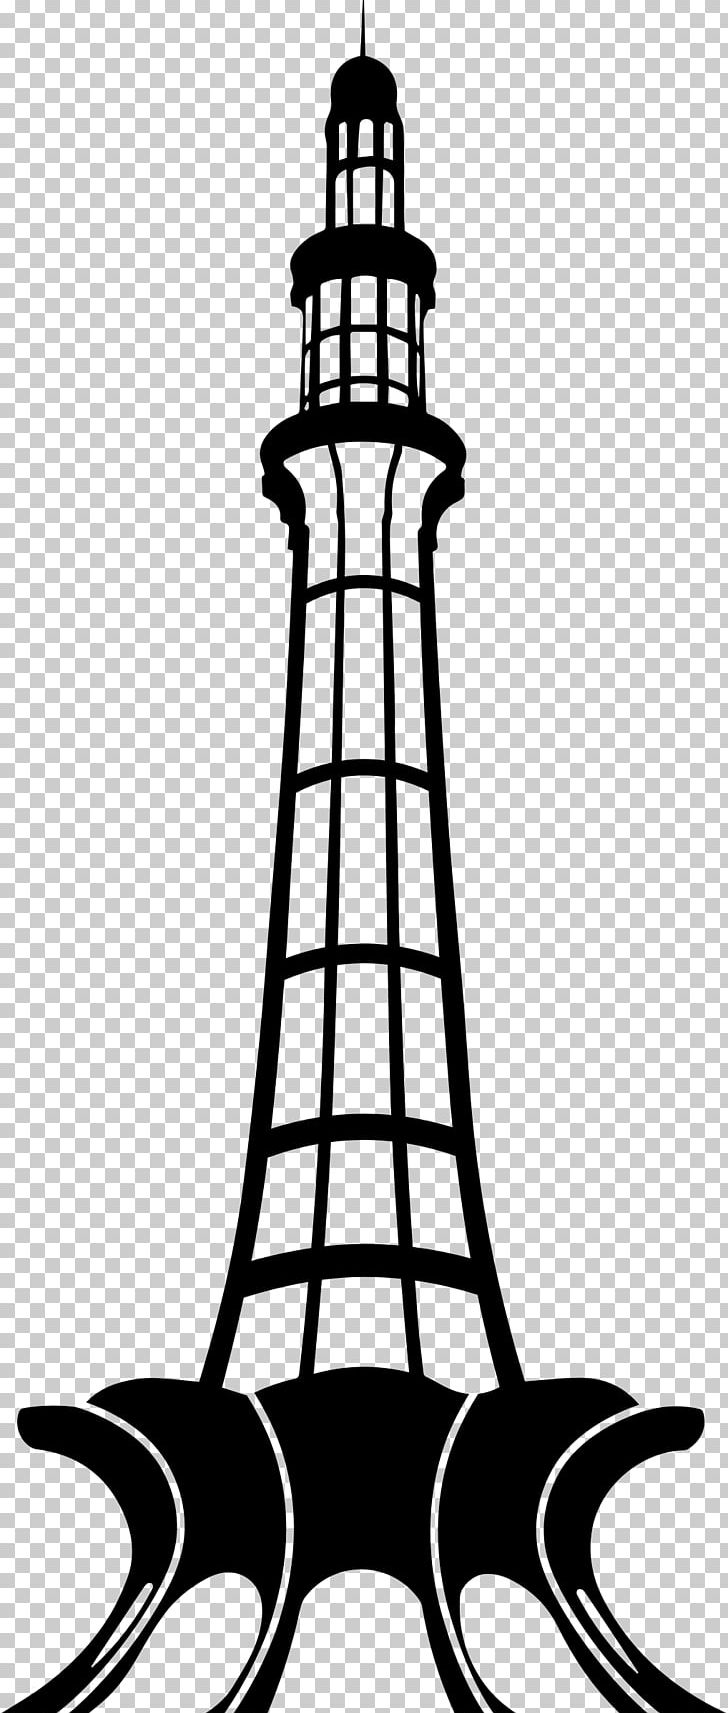 Minar-e-Pakistan Drawing PNG, Clipart, Artwork, Black And White, Clip